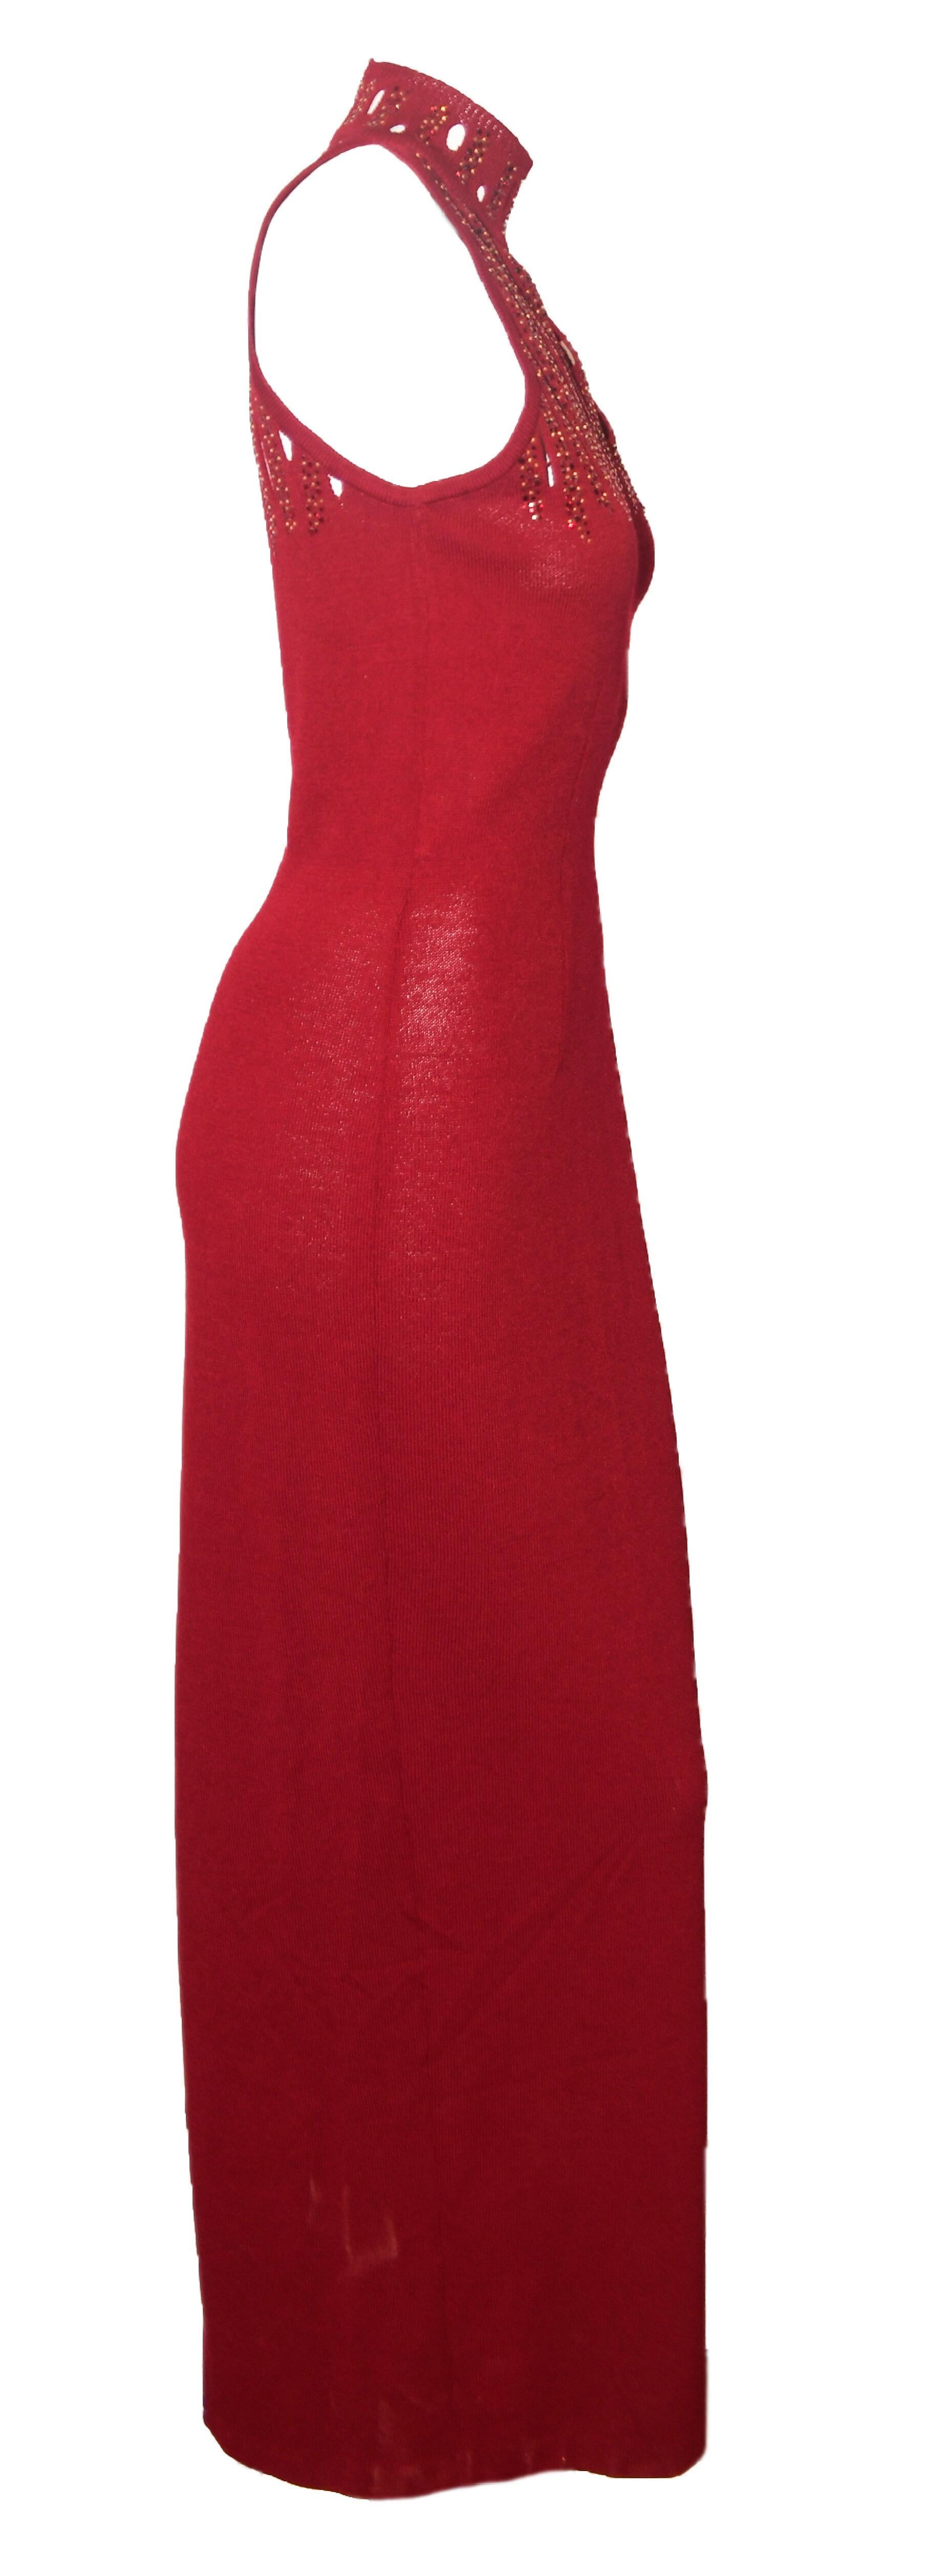 St. John burgundy long evening gown decorated with glimmering red and gold tone crystals, on the bodice, with peek a boo slits.  This knit dress is sleeveless and unlined.  For closure, a hidden zipper at back, also, a vent at back.  This garment is